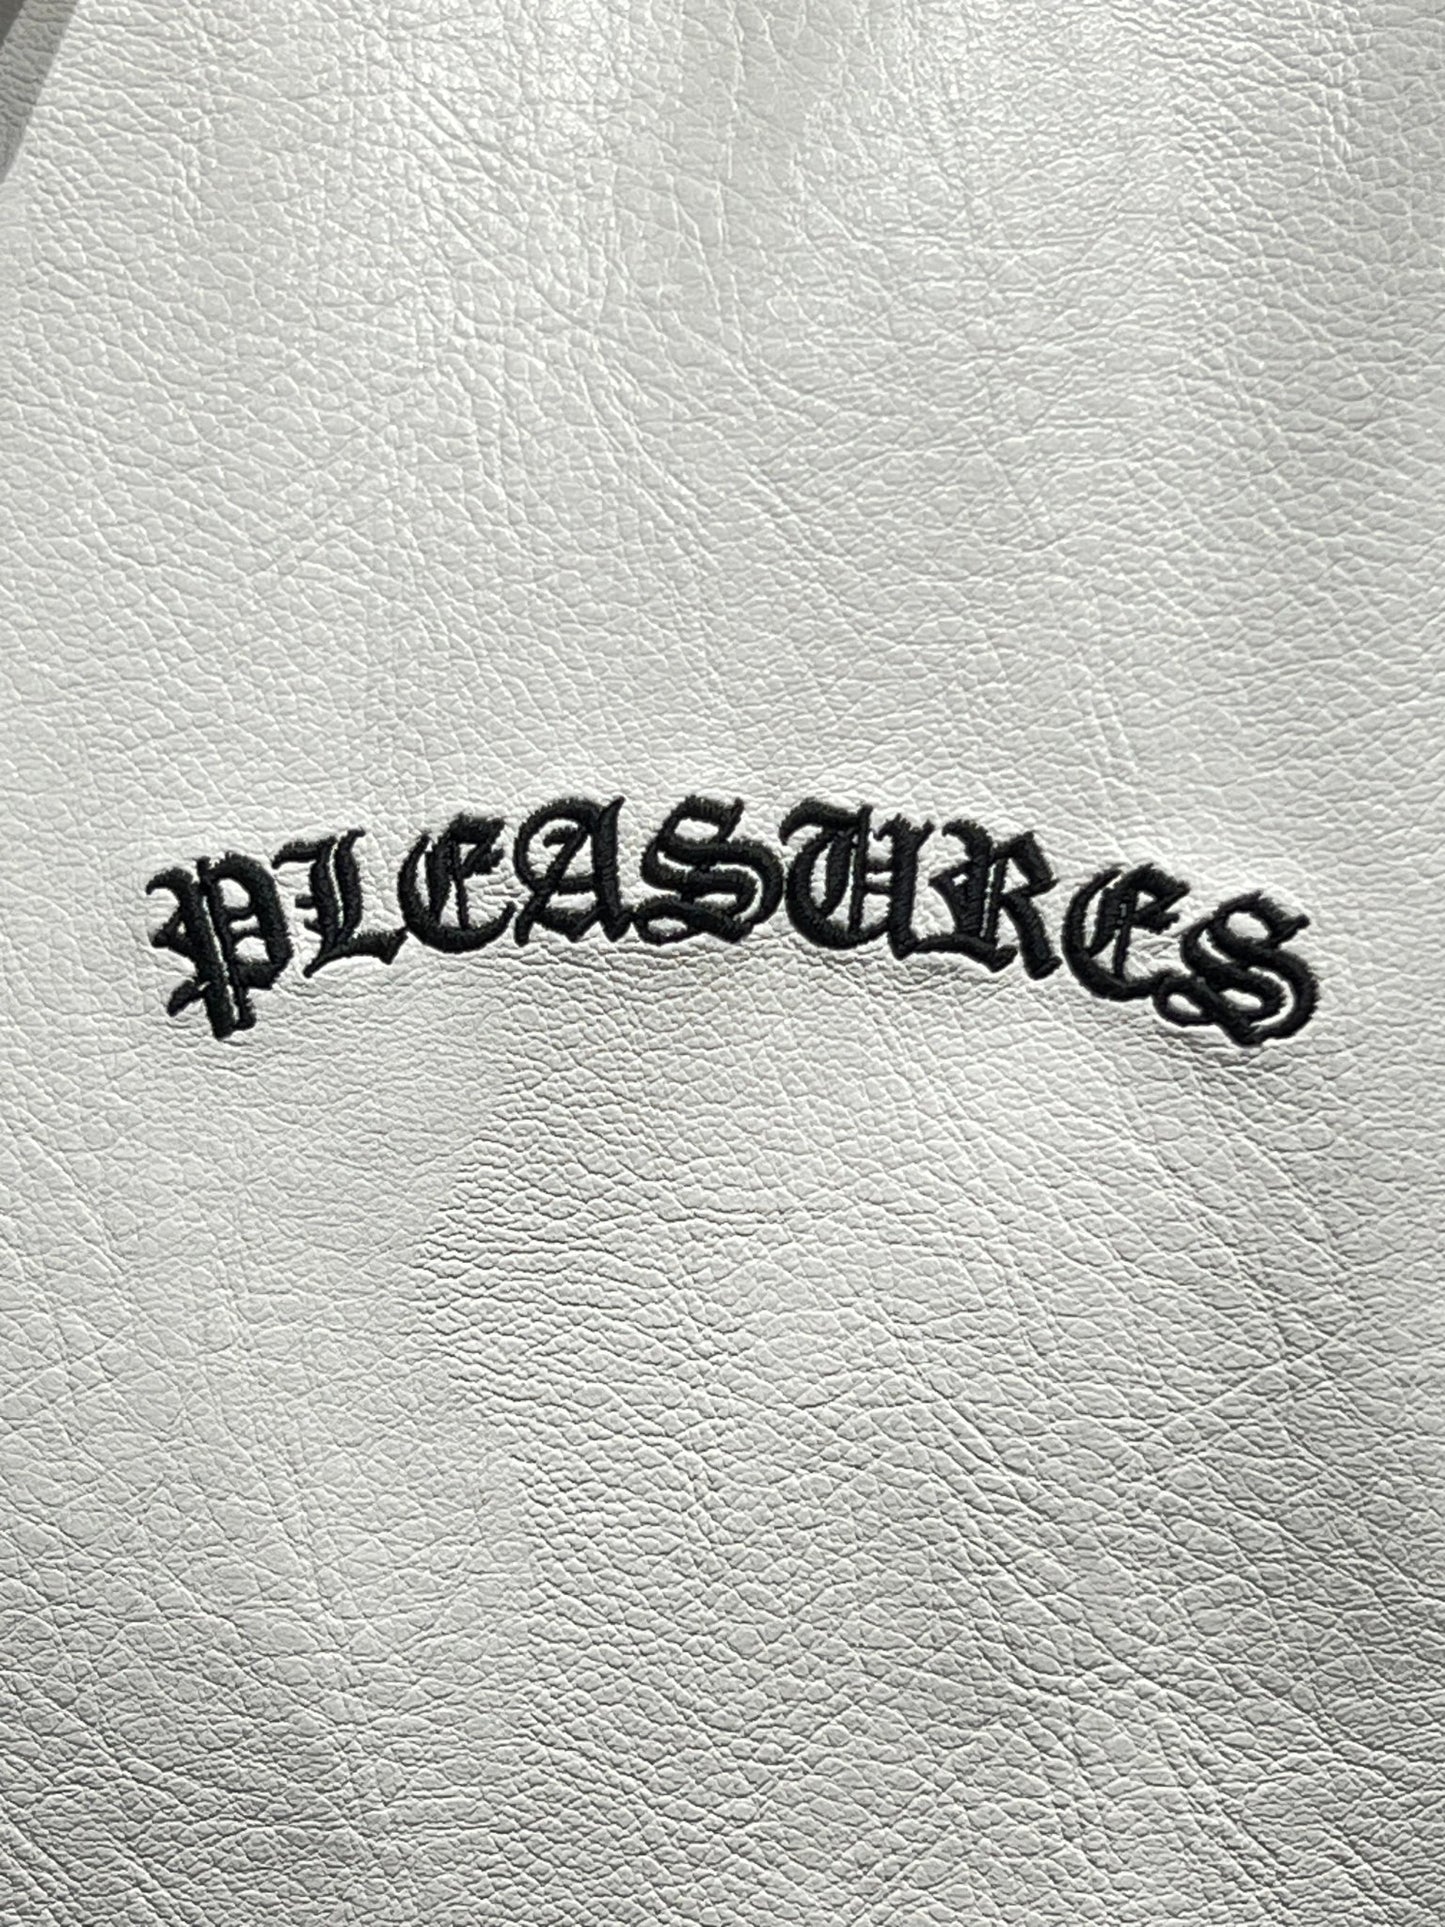 A white Polyurethane bag with the word PLEASURES embroidered on it.